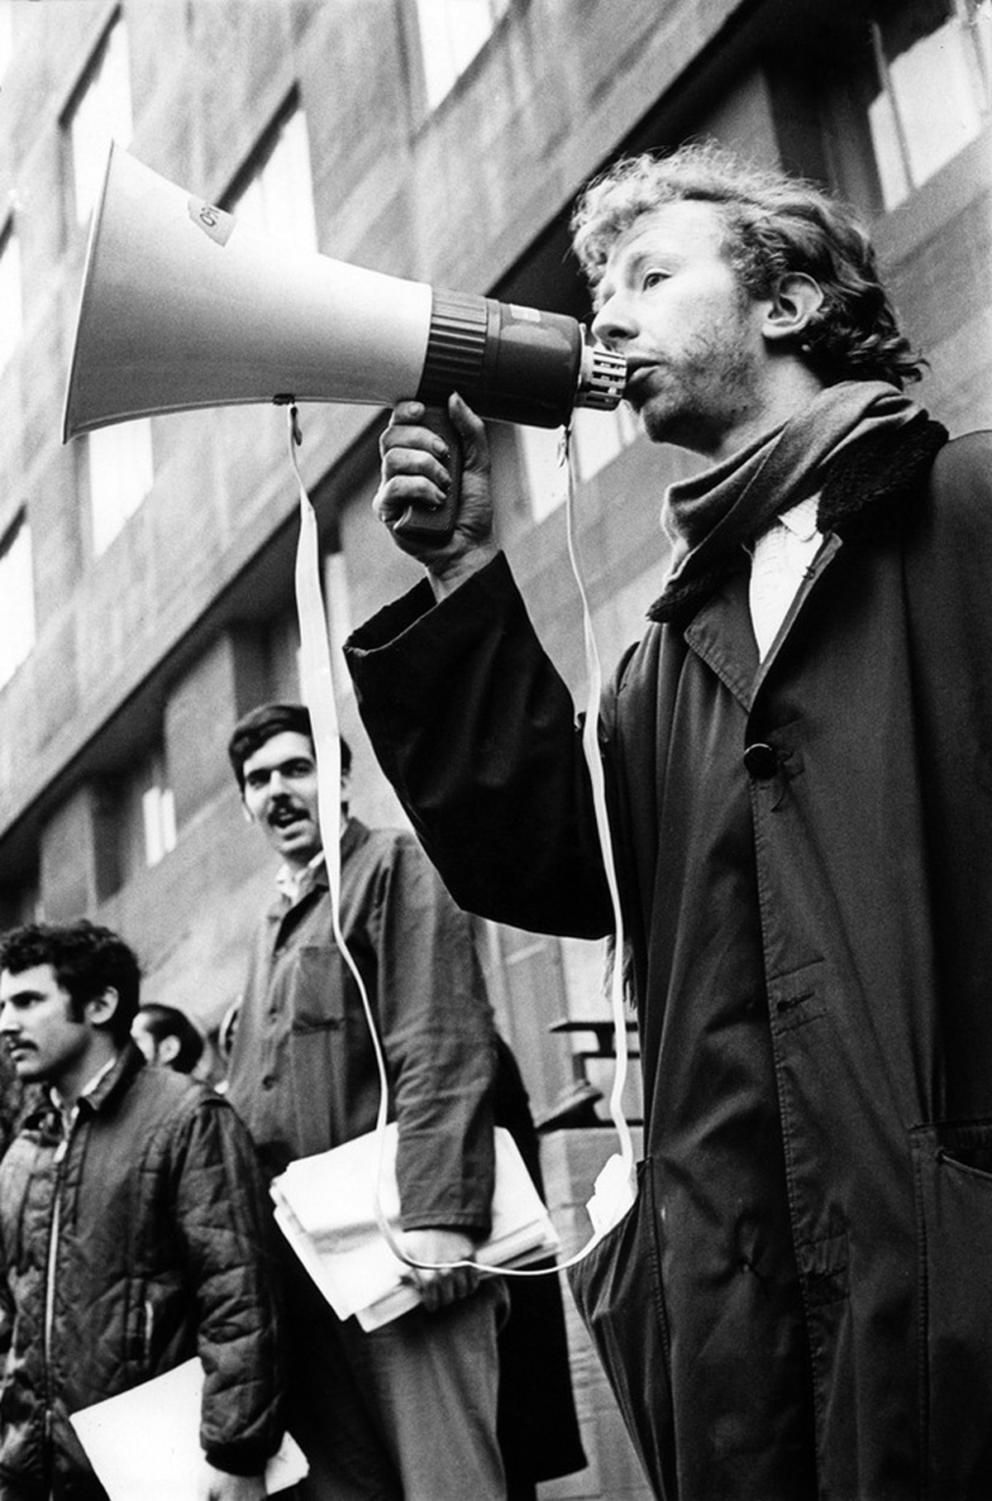 A student protester speaks in front of the admin building in 1969.